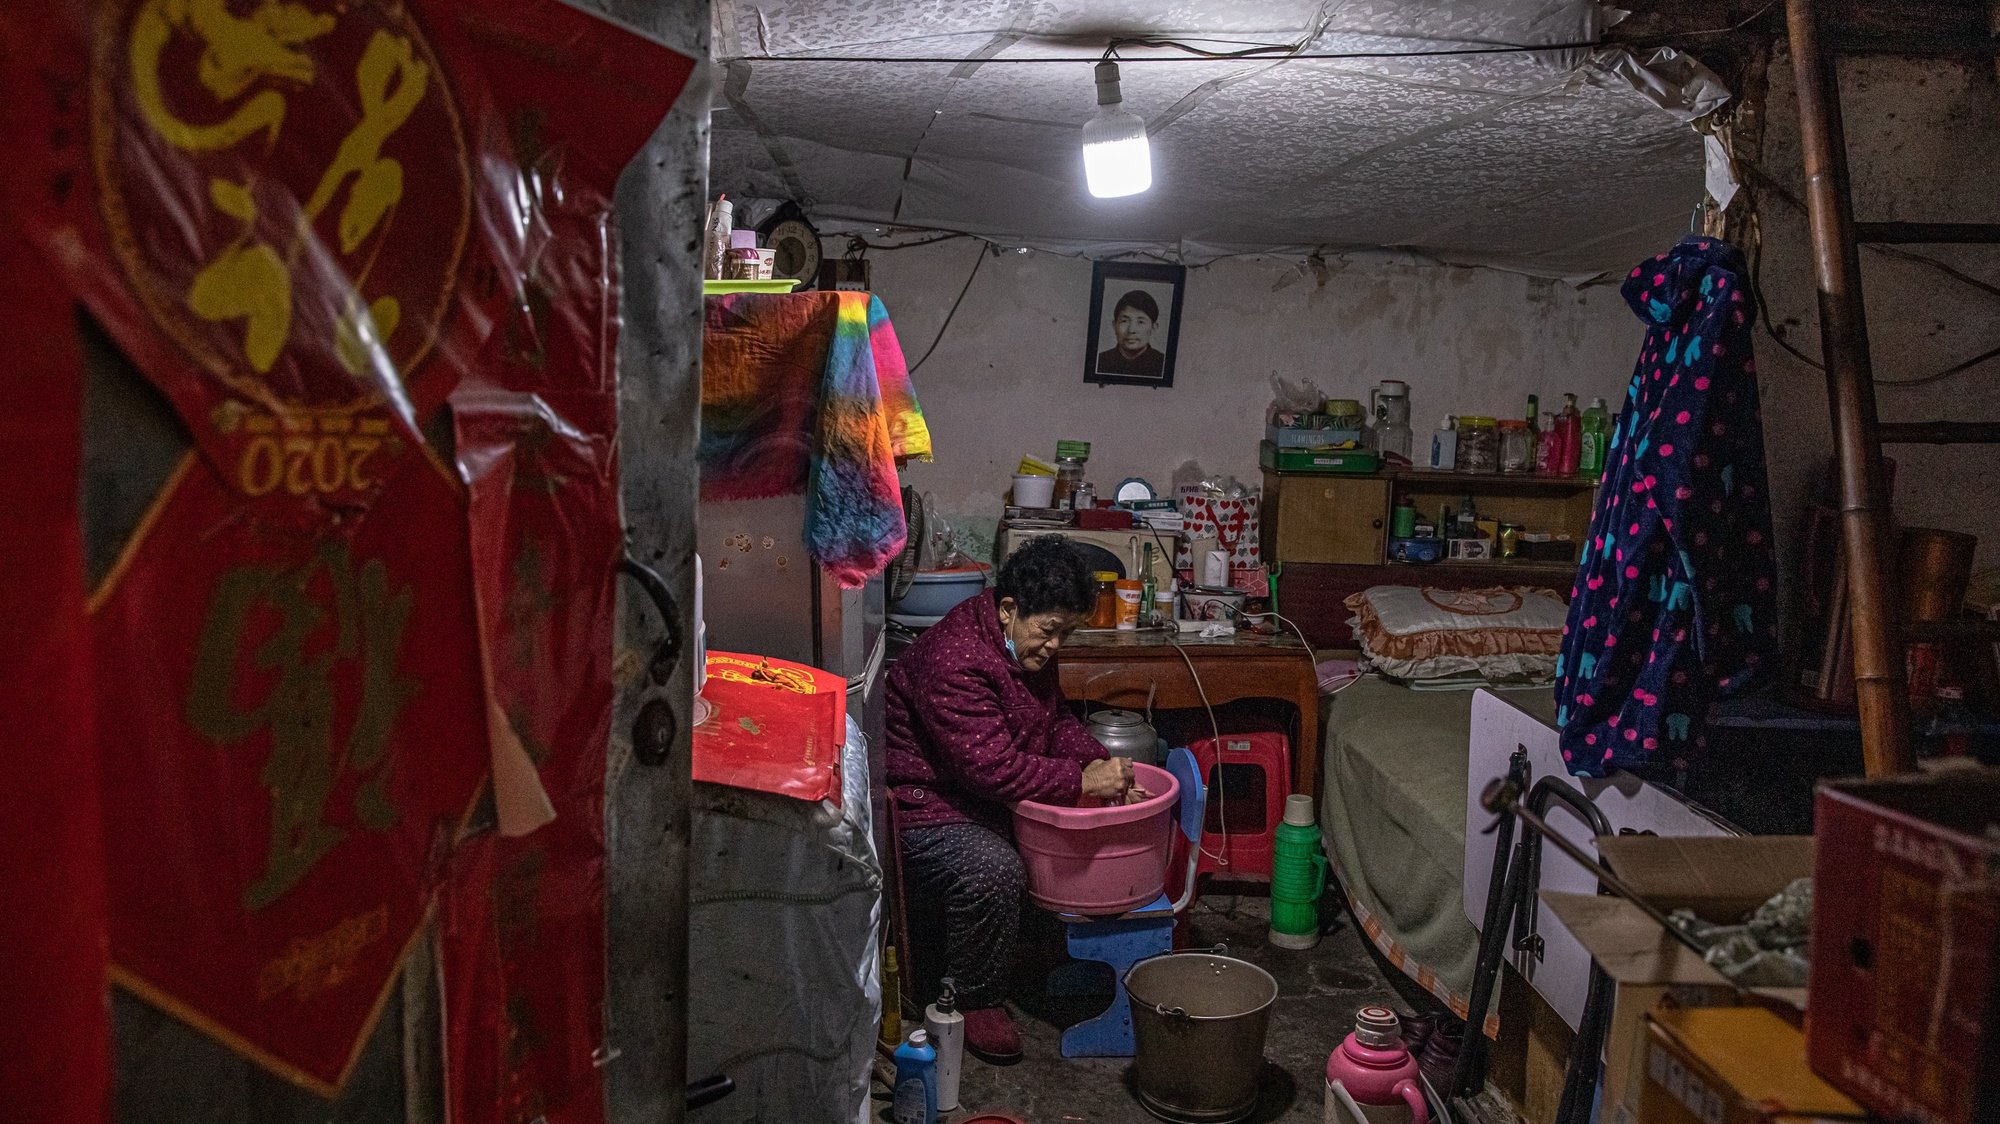 epa08957100 An elderly woman at her house in a residential area of Wuhan, China, 22 January 2021. The day 23 January 2021 marks the one-year anniversary of the start of a strict 76-day lockdown of the Chinese city of Wuhan where the coronavirus was first discovered before spreading across the world into a deadly global pandemic.  EPA/ROMAN PILIPEY